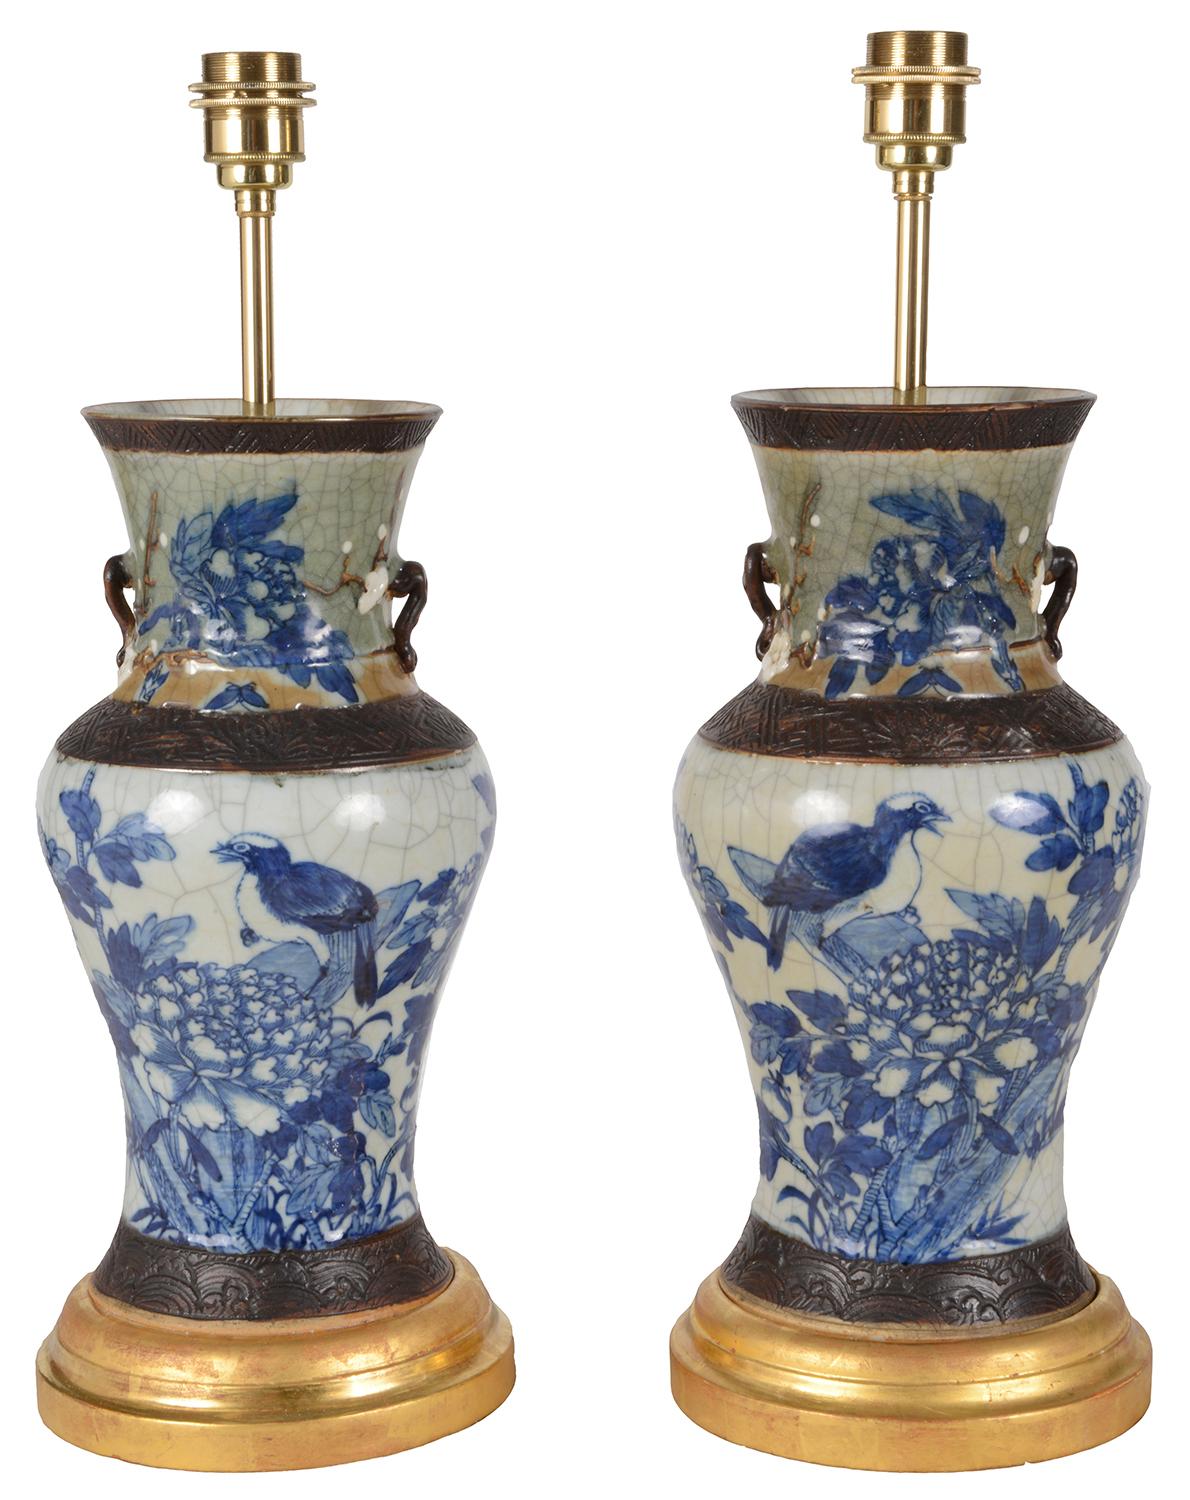 Pair late 19th century Chinese blue and white crackle ware vases, each with hand painted scenes of Doves sitting among flowers and foliage set between Brown engraved boarders.